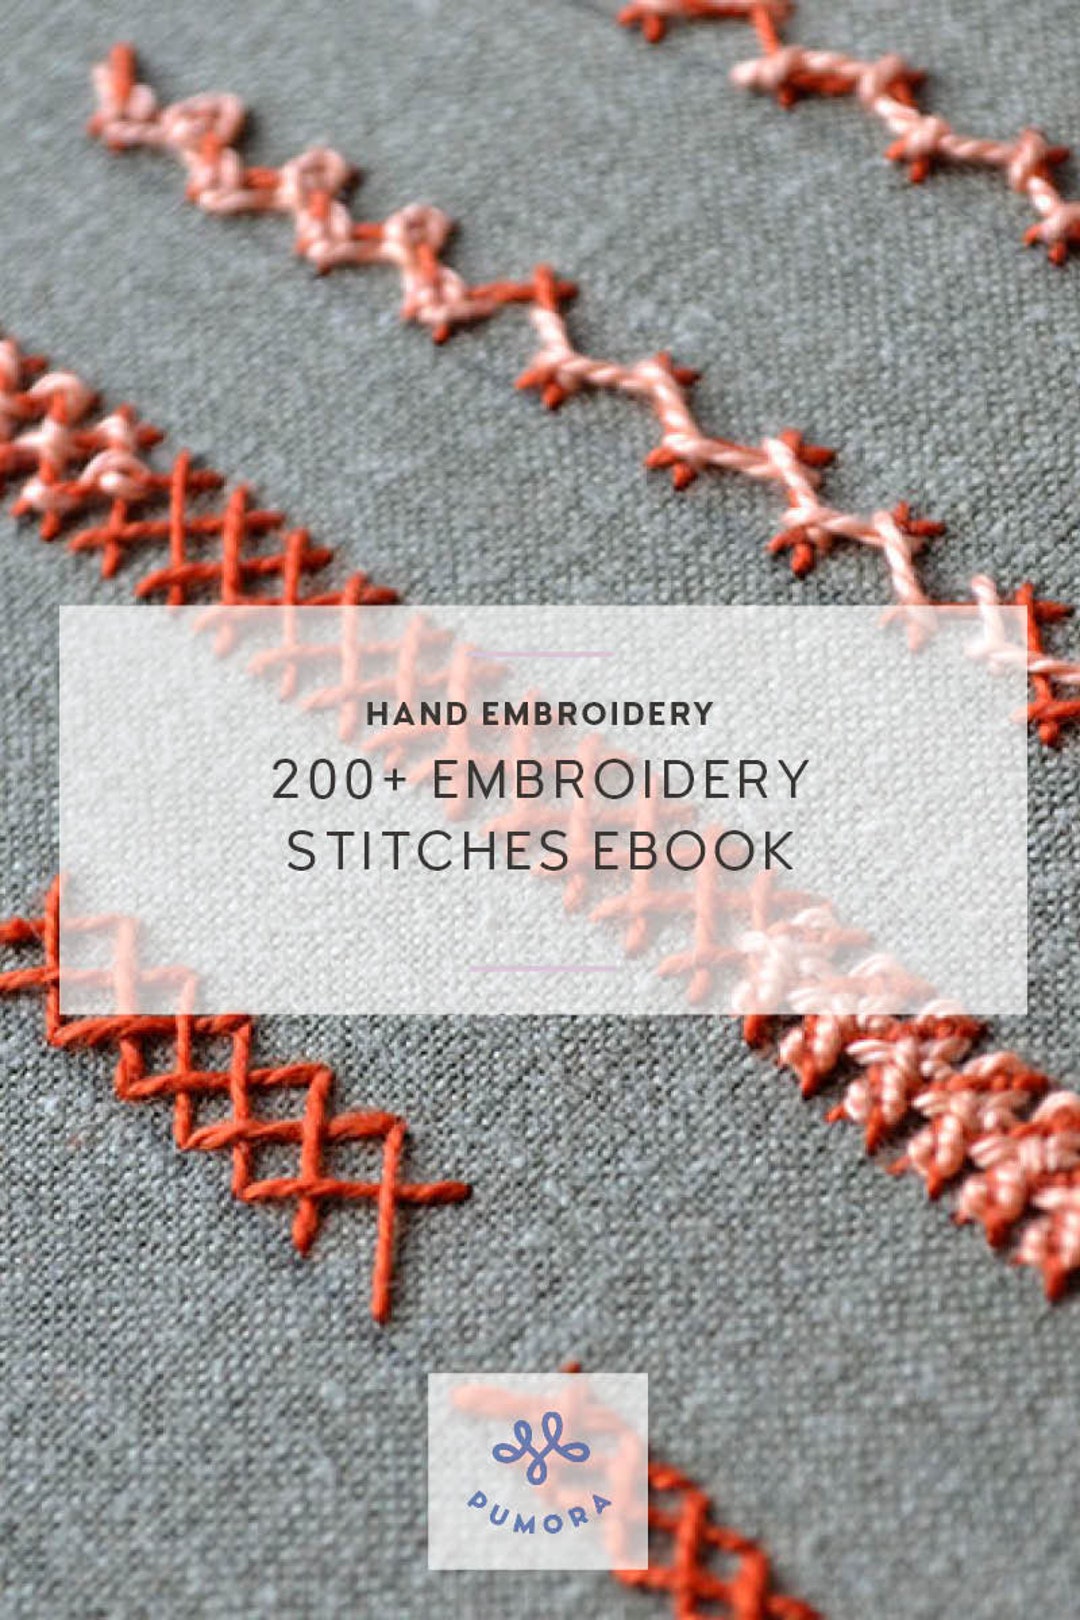 The Book of Embroidery Stitches